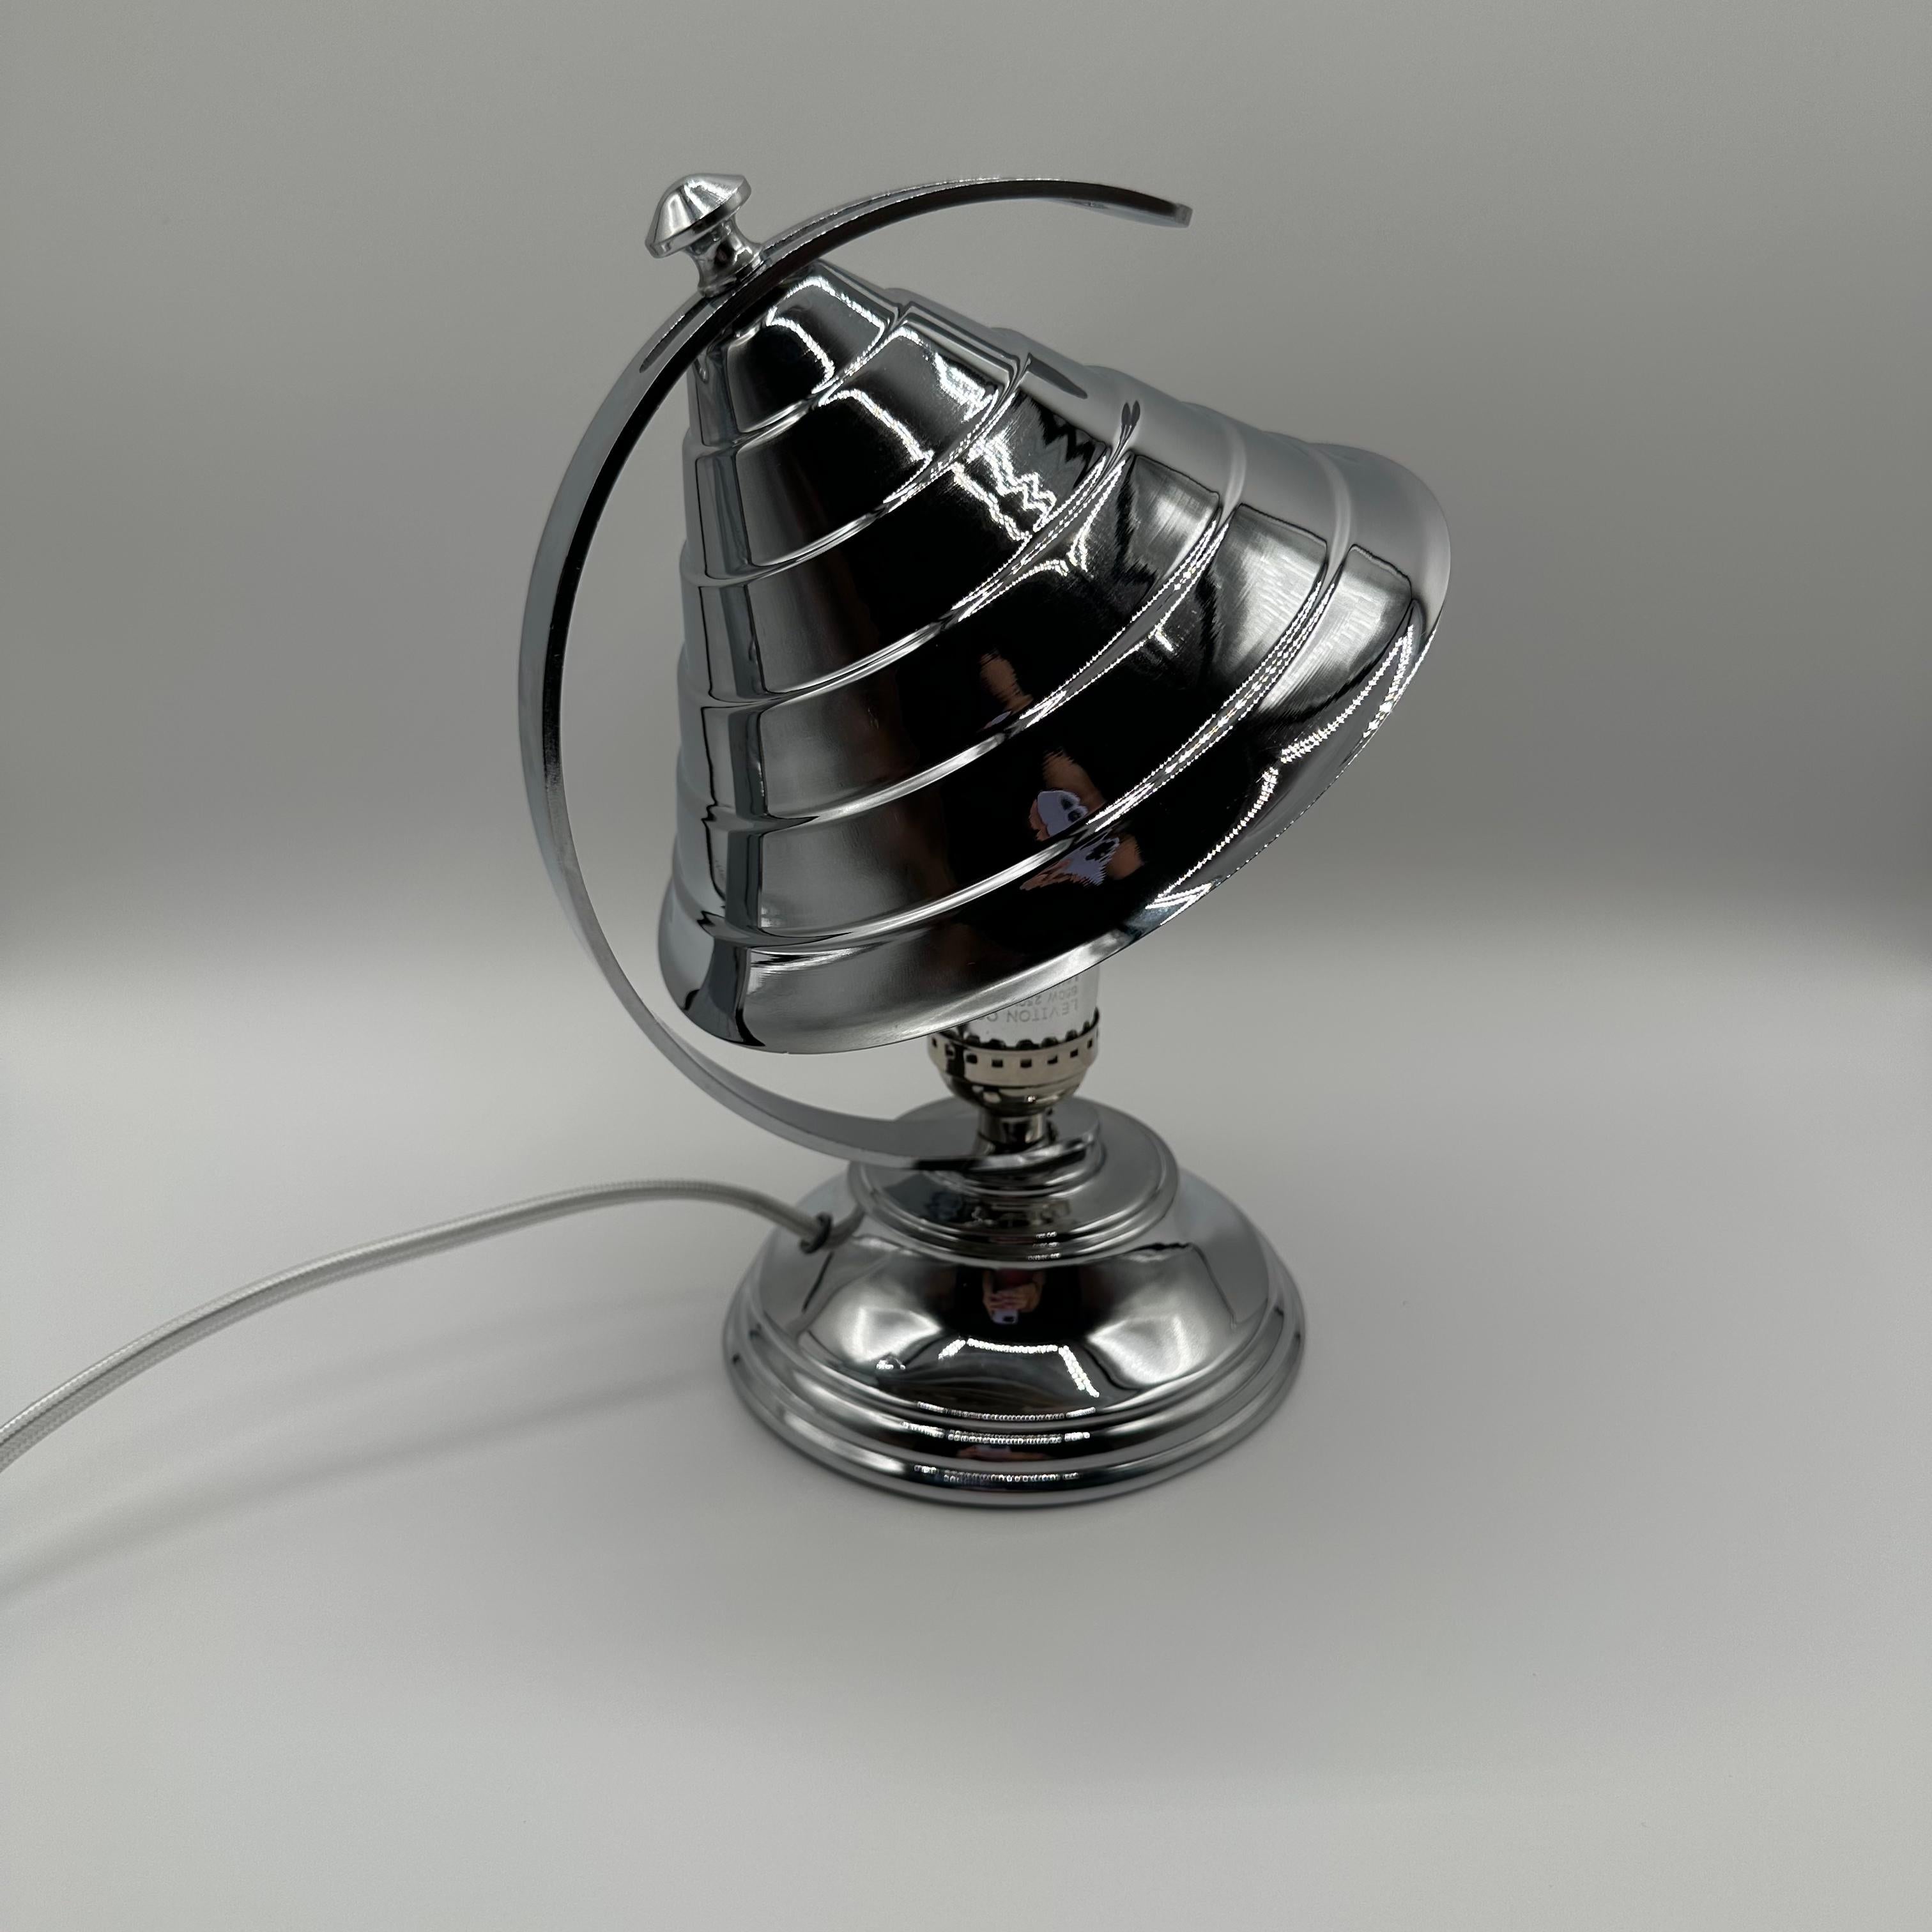 Mid-20th Century Art Deco Modernist Chrome Small Table Lamp with Adjustable Shade For Sale